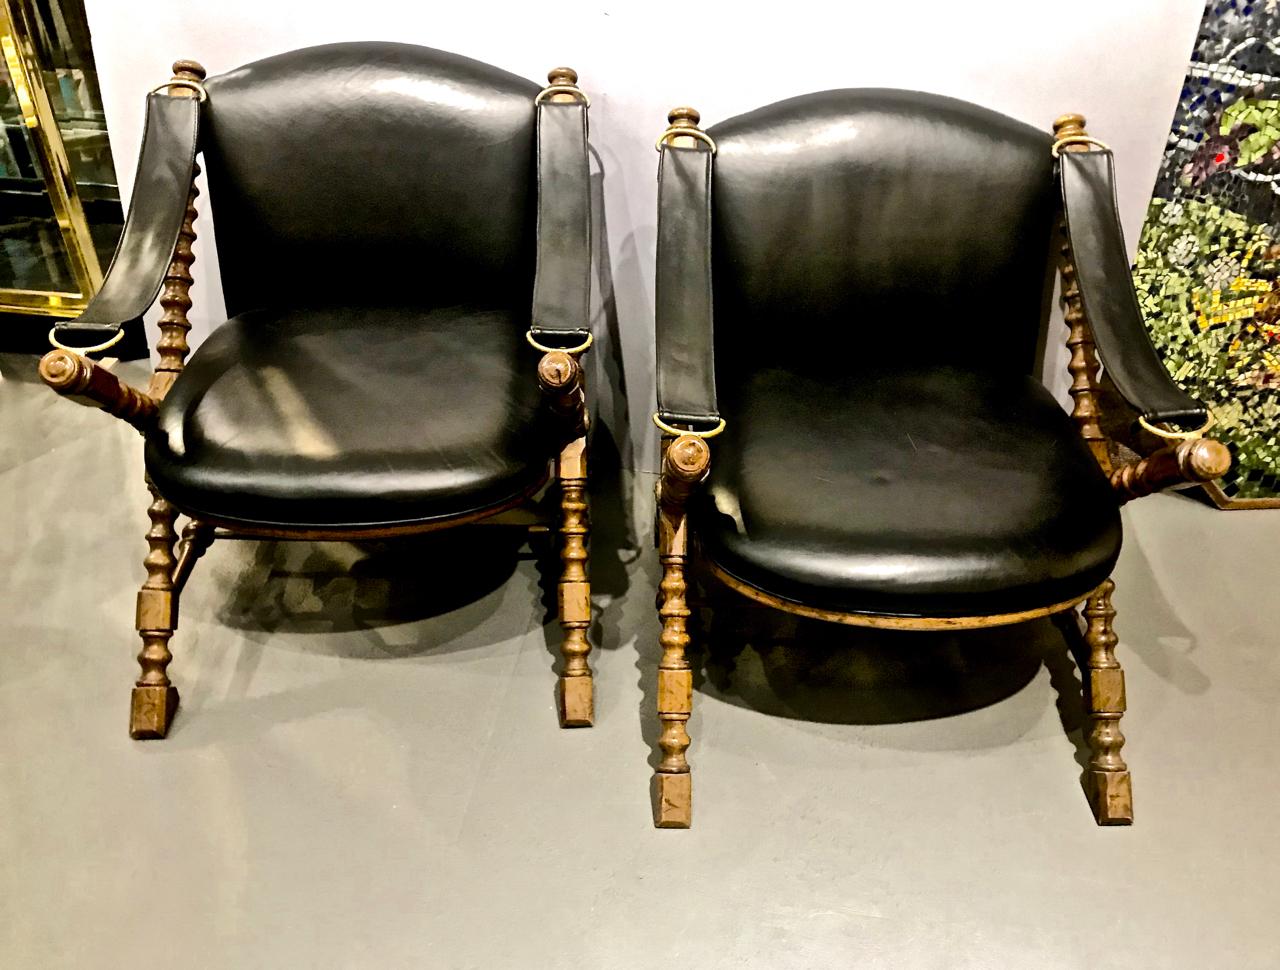 This is a superb pair of carved wood and leather campaign or safari chairs by Drexel that dates to the 1970s. Both chairs retain their original wood surface and leather upholstery which in very good condition. The leather armrest straps are